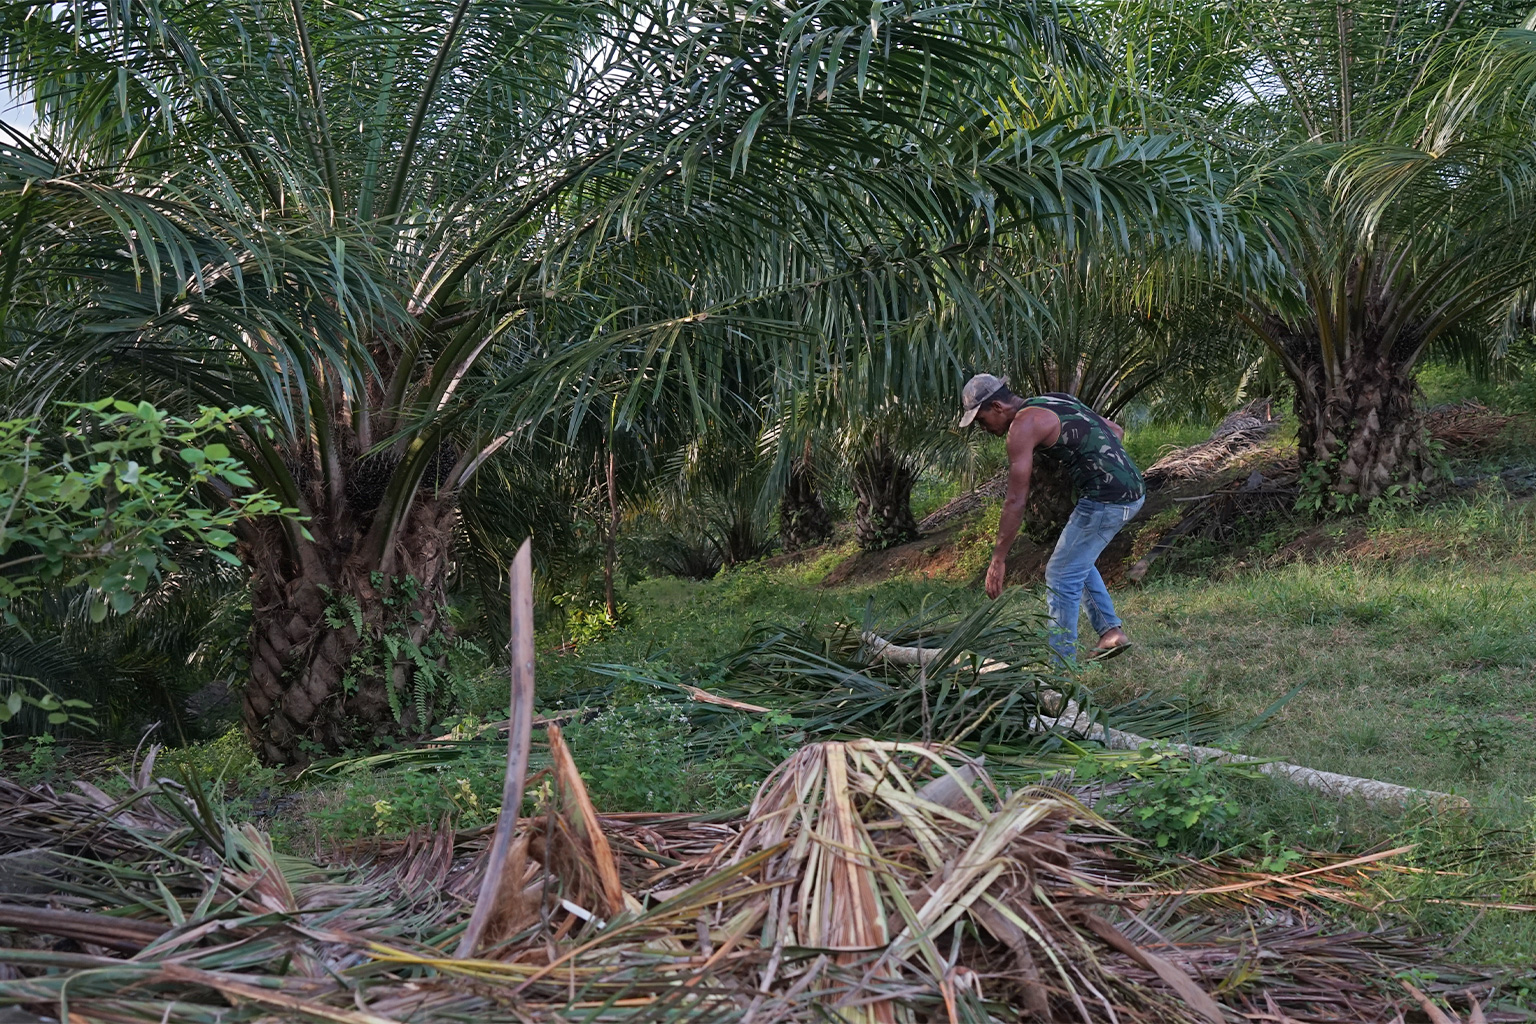 A palm oil farmer in Cot Girek showing palm shoots demolished by an elephant and its calf